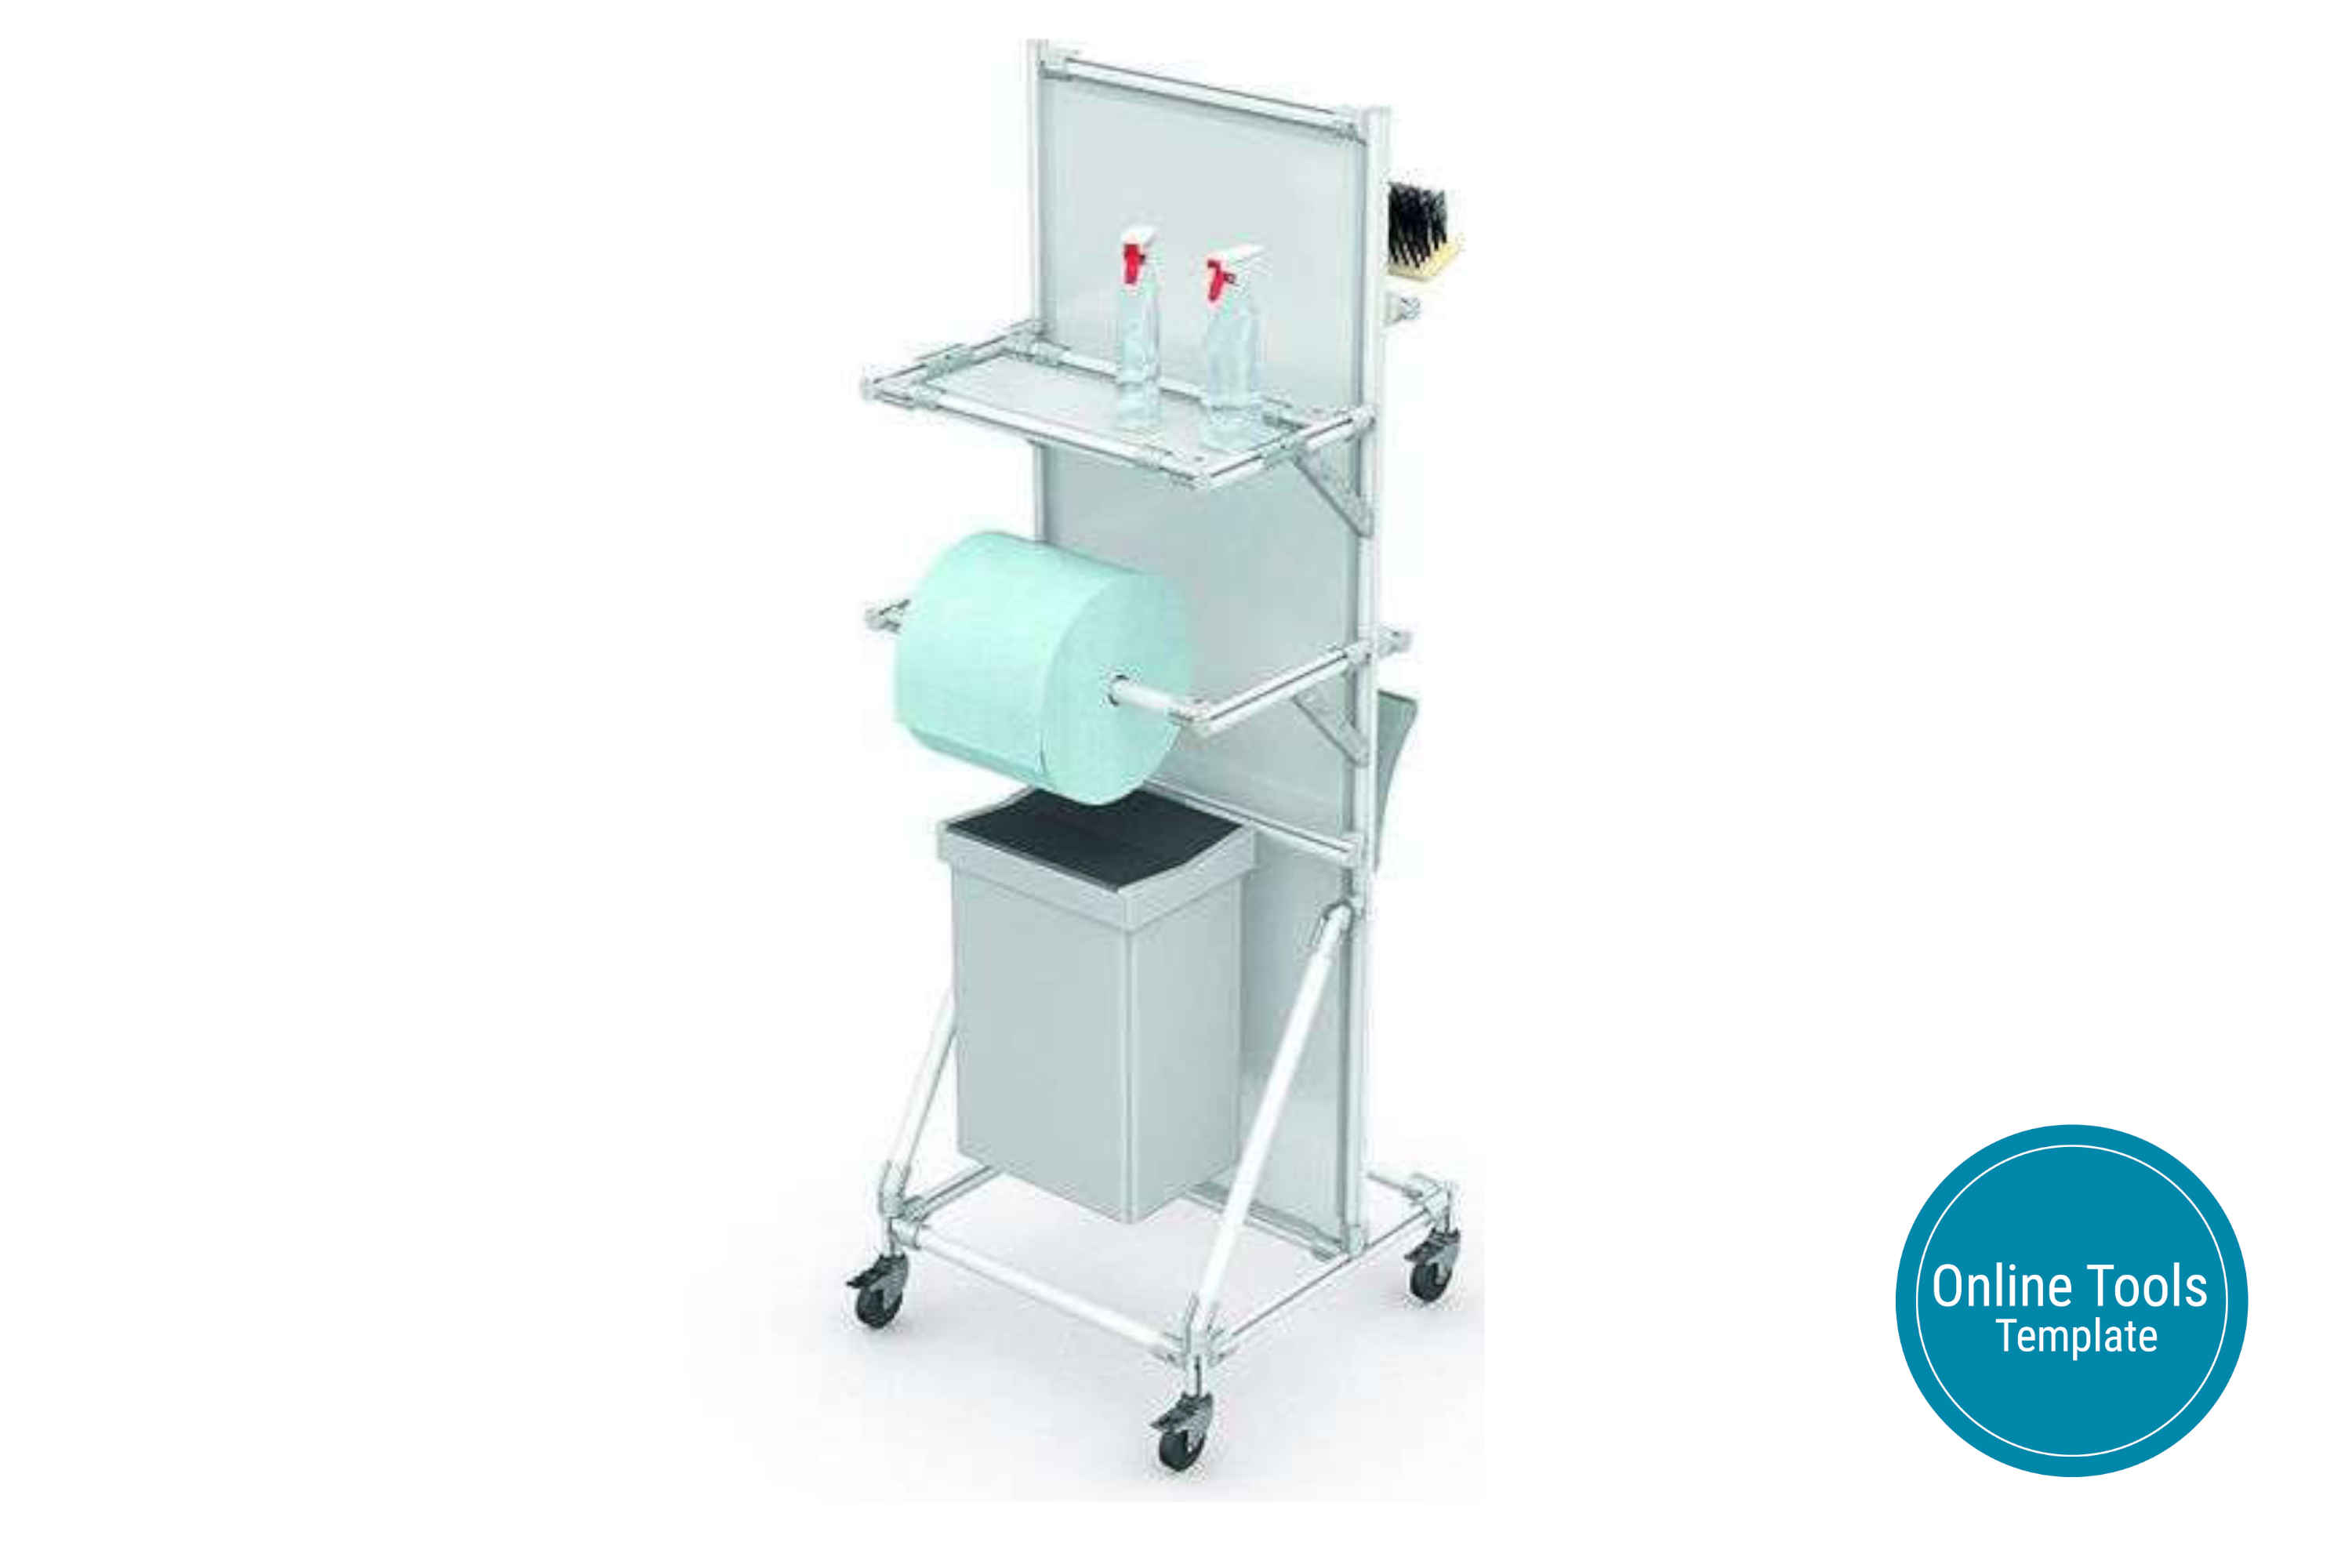 Lightweight and compact cleaning trolley with 5S features